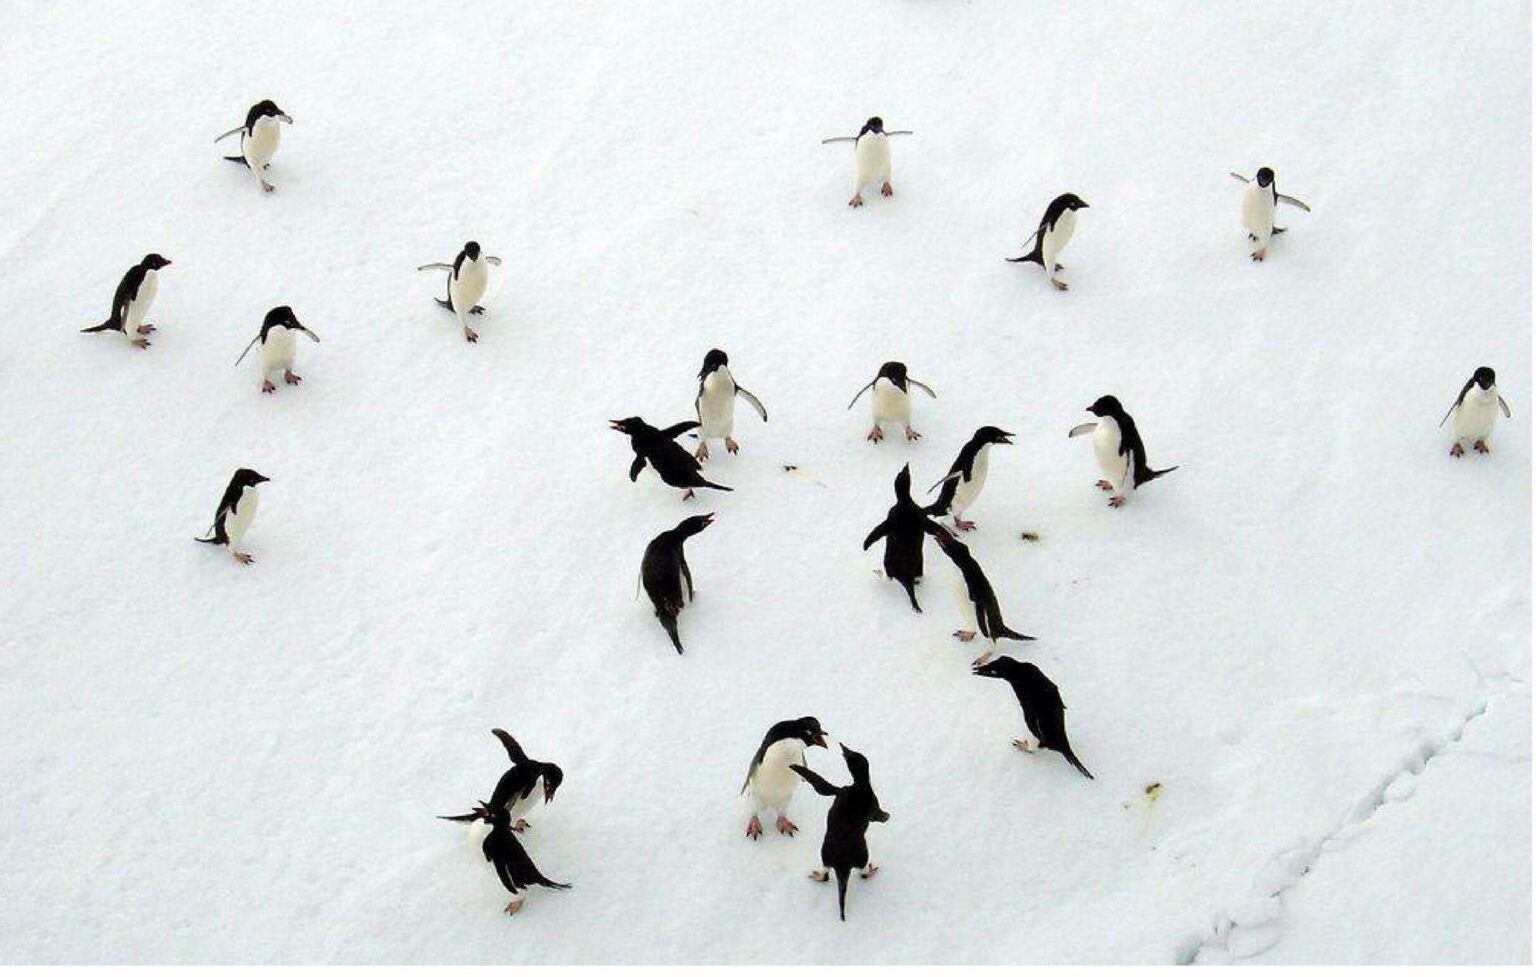 Emperors & the South Pole, Penguins